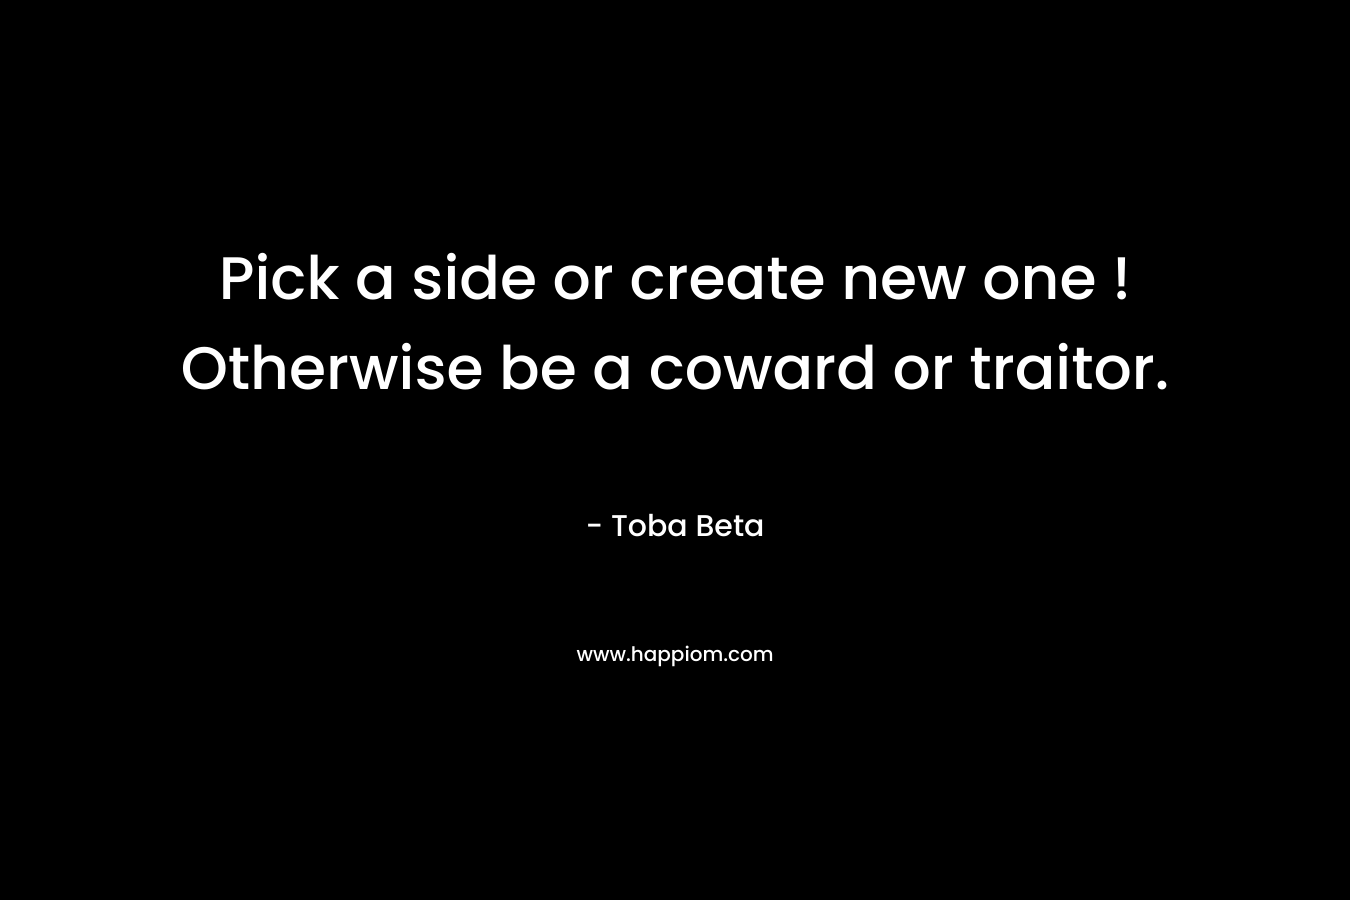 Pick a side or create new one ! Otherwise be a coward or traitor.